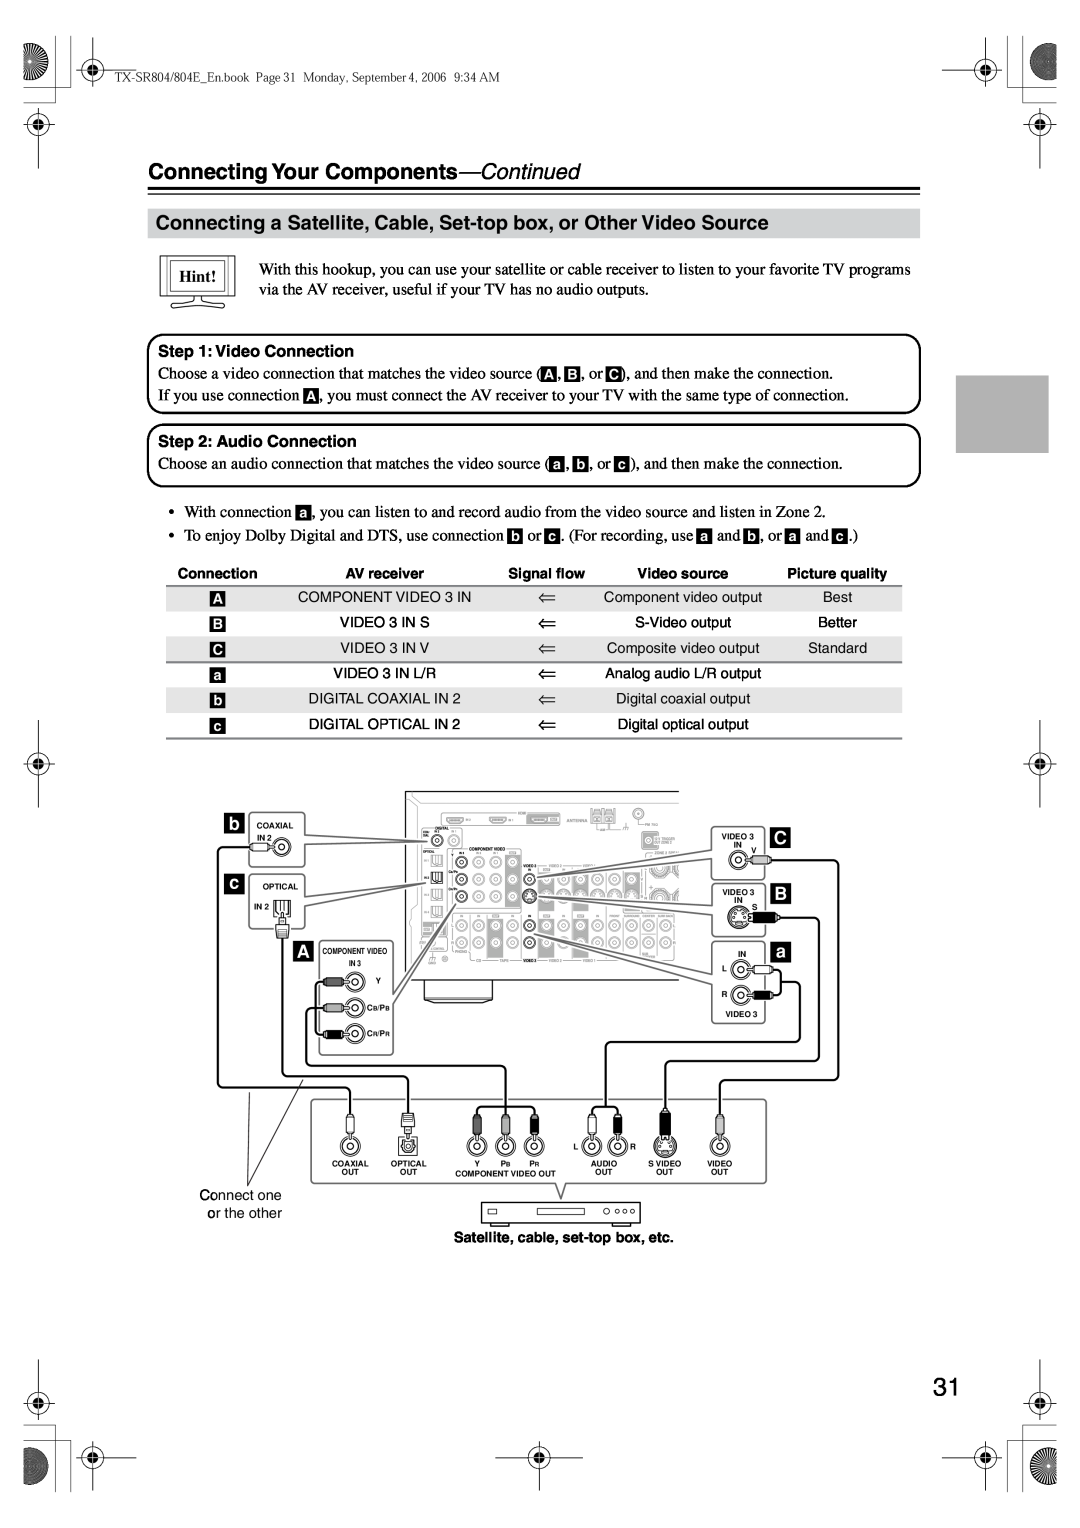 Onkyo TX-SR804E instruction manual Connecting Your Components—Continued, C B a, Hint, Satellite, cable, set-topbox, etc 